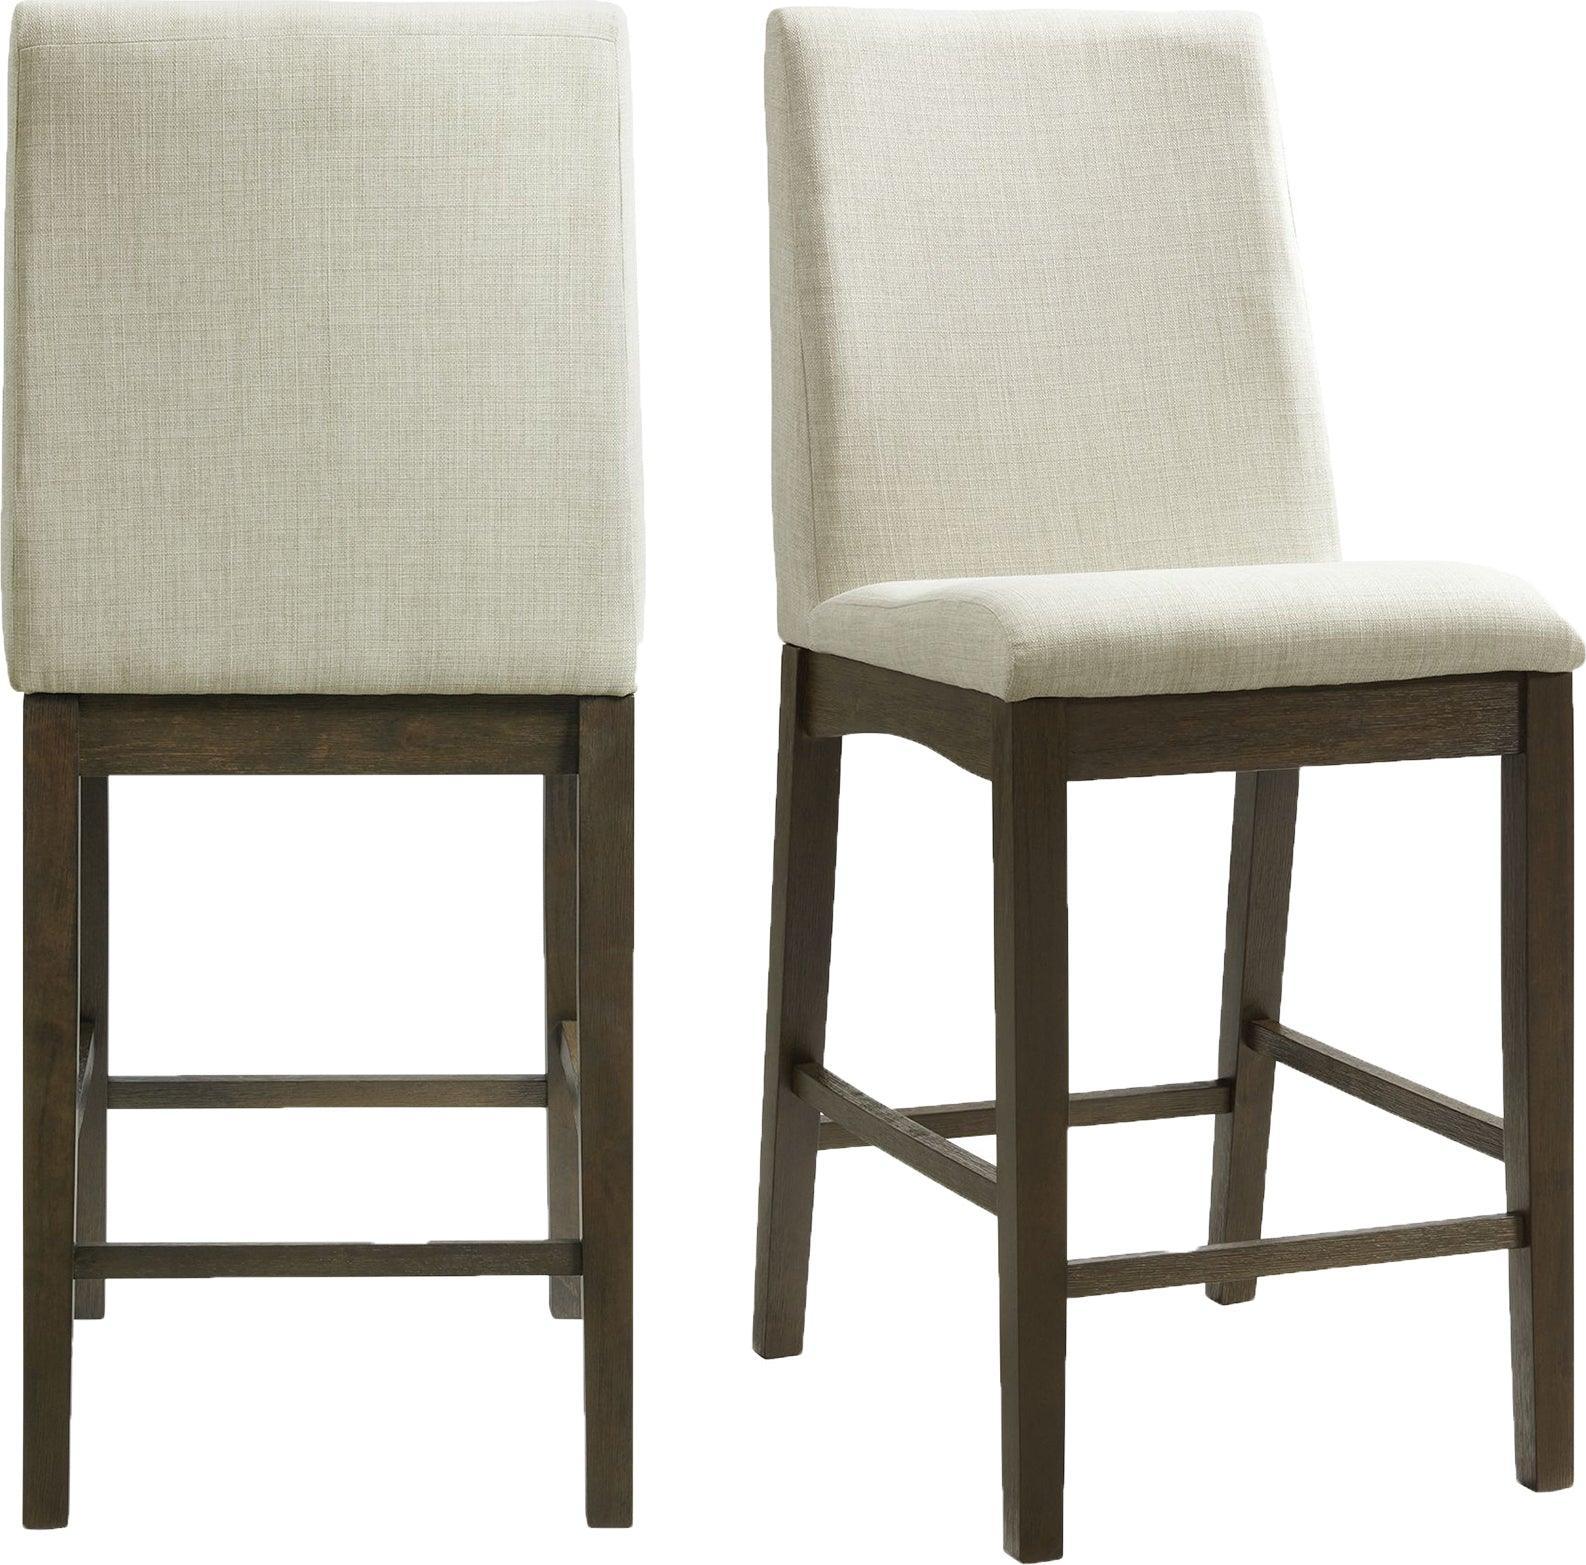 Elements Barstools - Simms Counter Height Side Chair Set in Walnut (Set of 2)